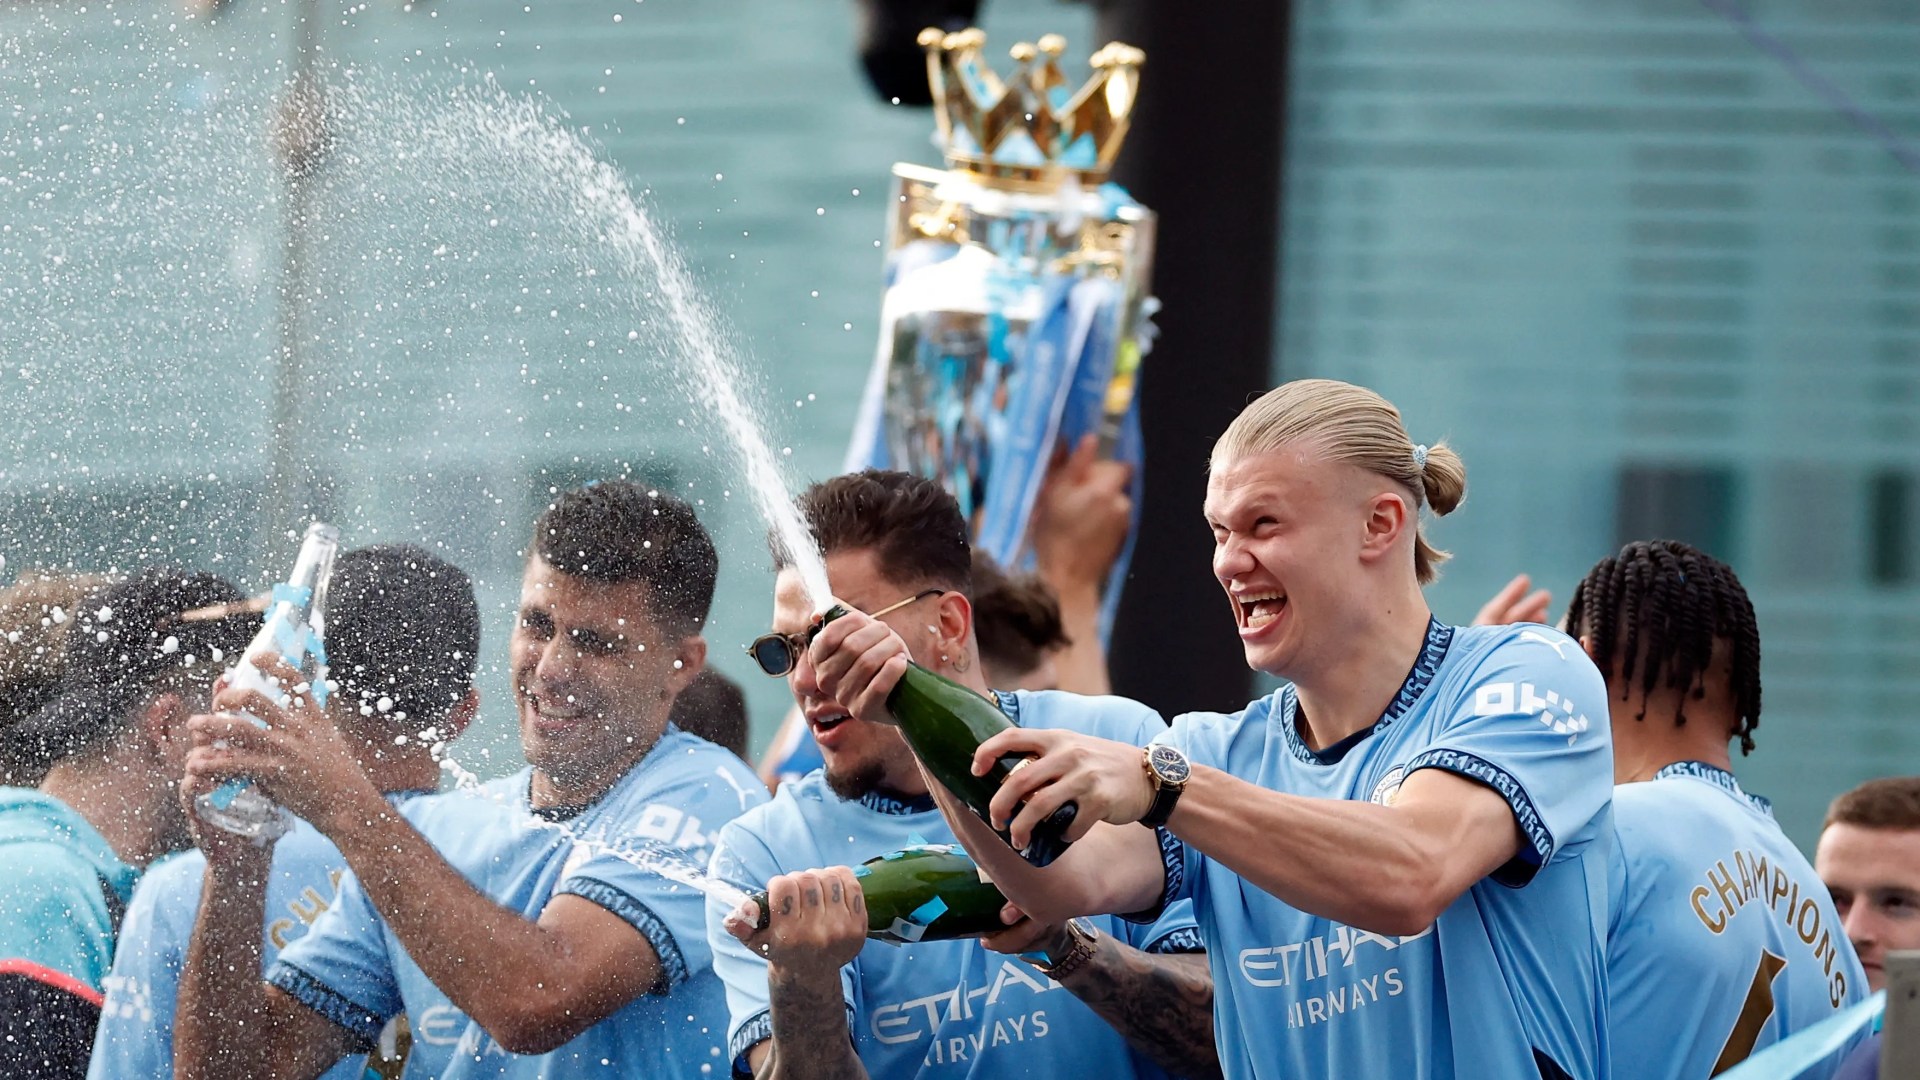 Manchester City Triumphs in Rainy Victory Parade Despite FA Cup Defeat